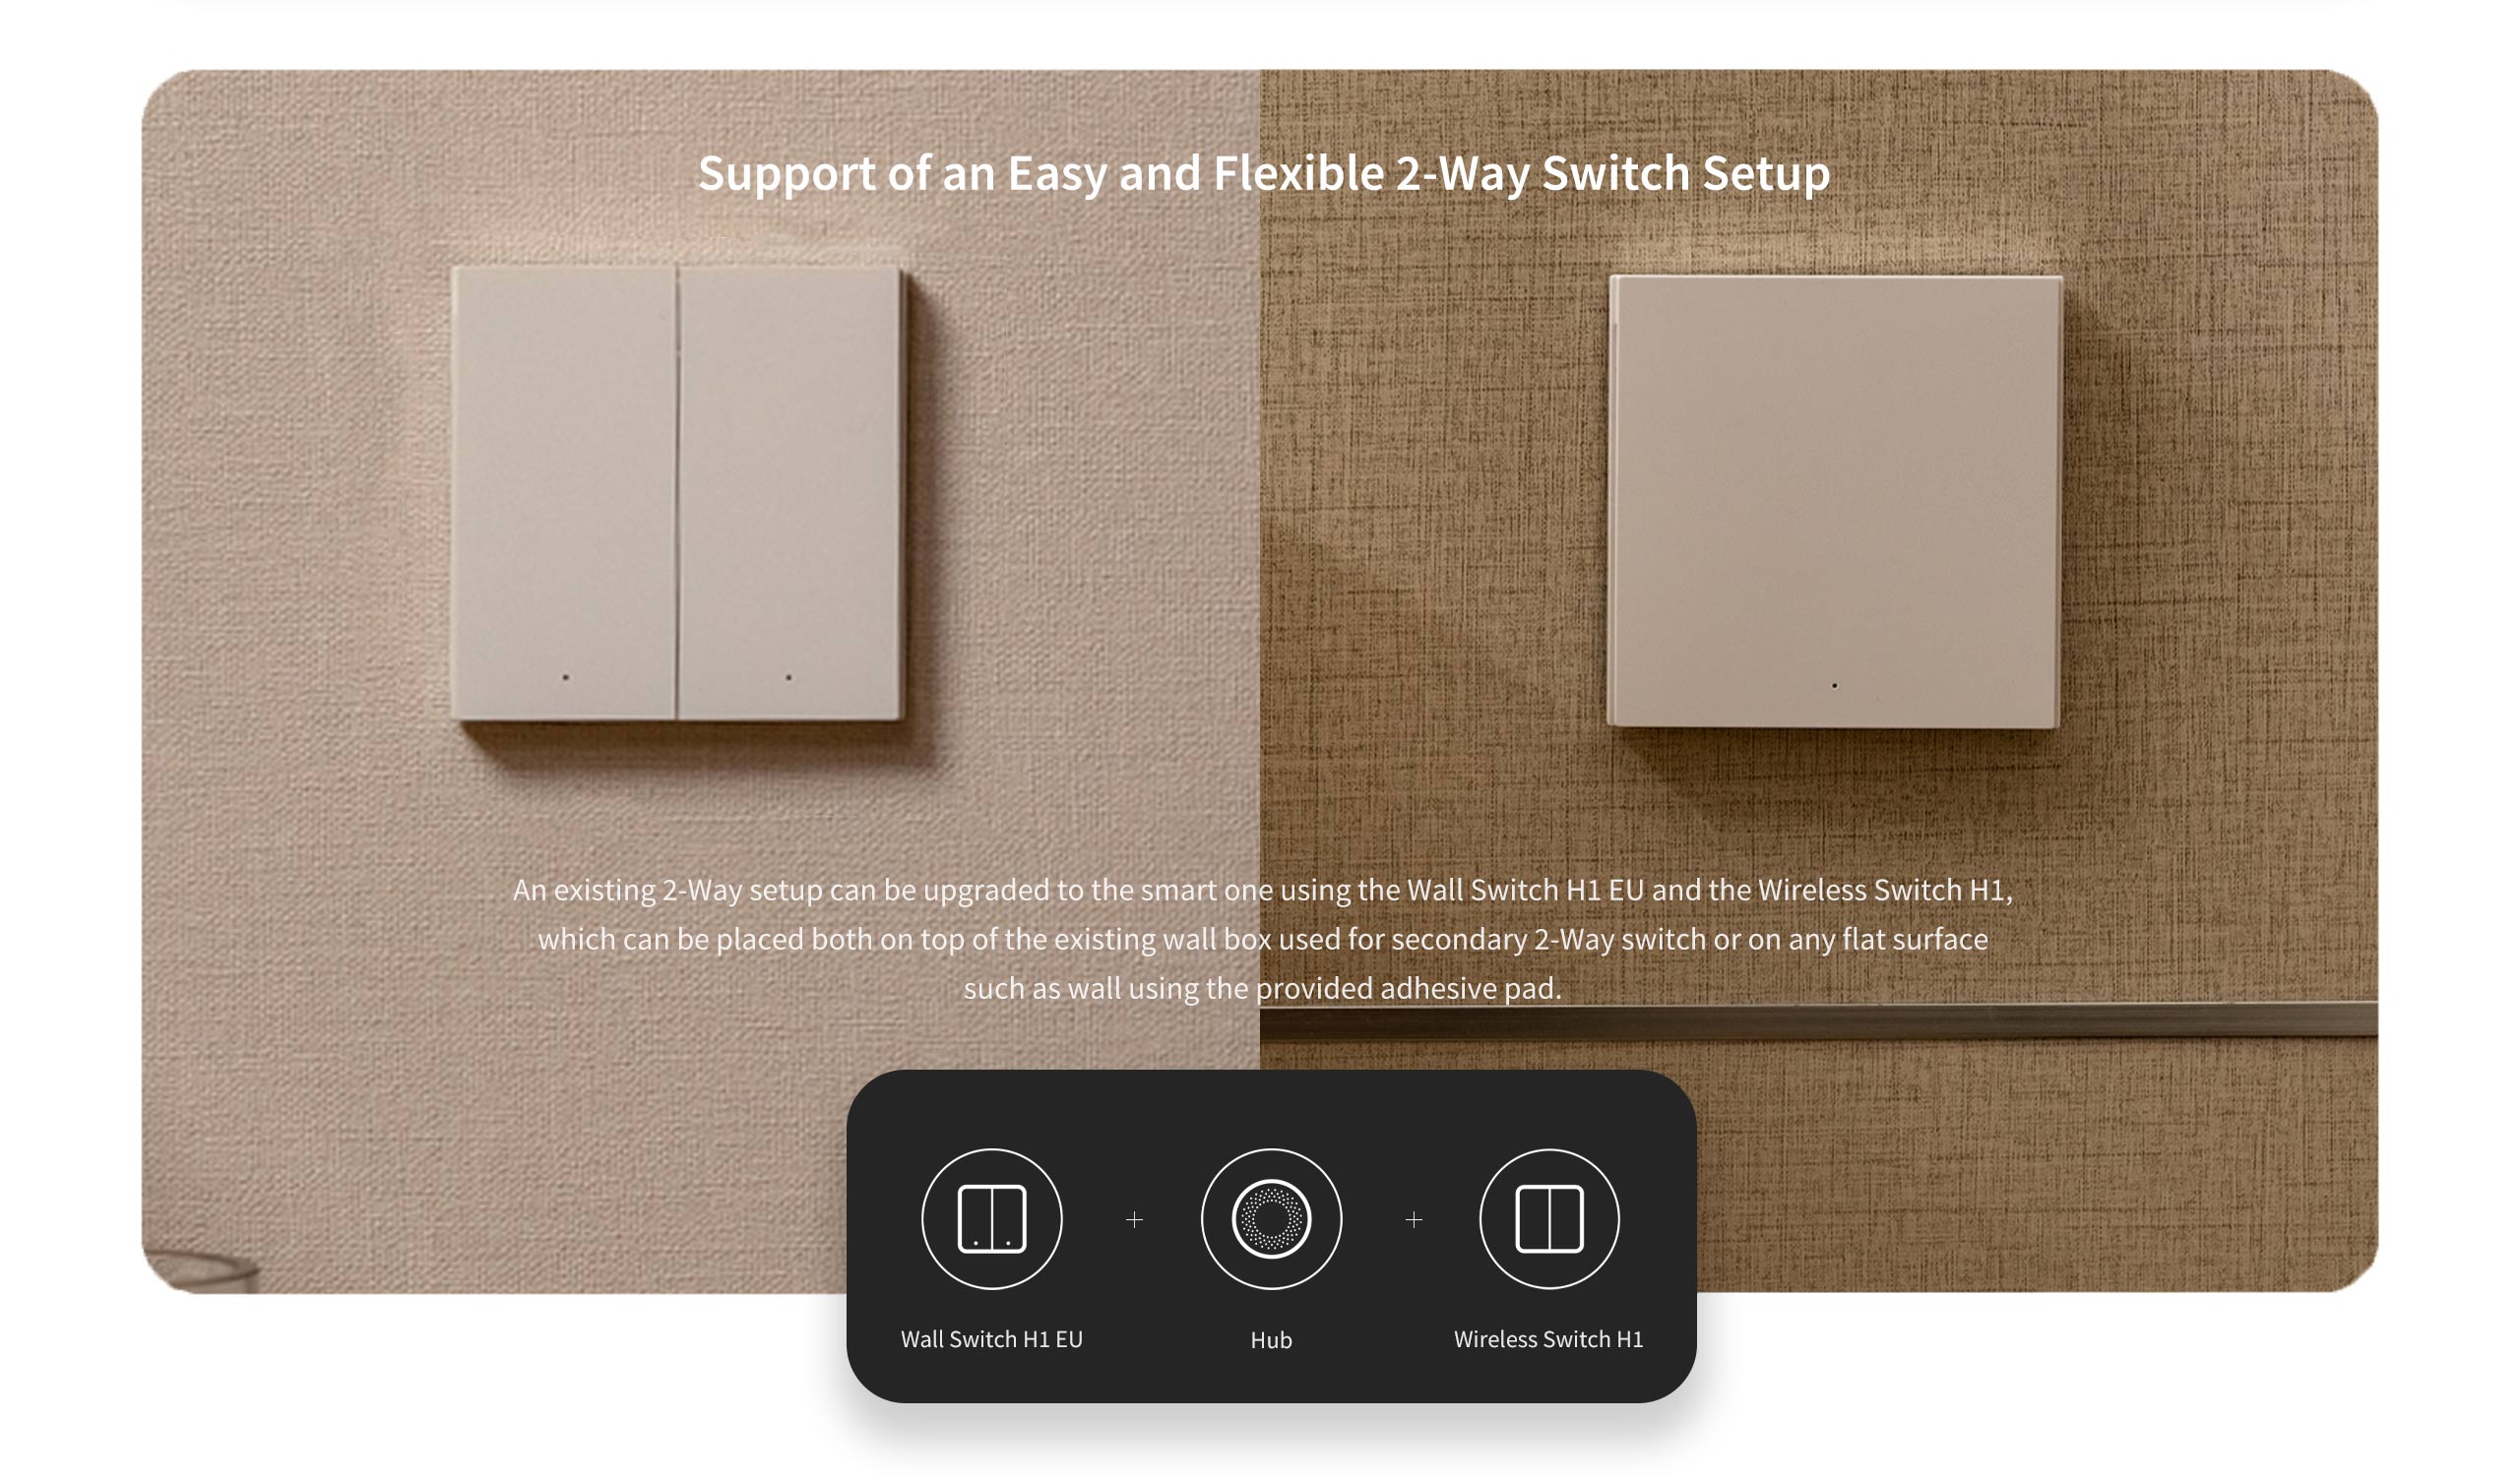 Smart Wall Switch H1 No Neutral pc 05 Aqara Smart Light Switch, Single Wall Switch that Functions as a Regular Light Switch as well as being Smart